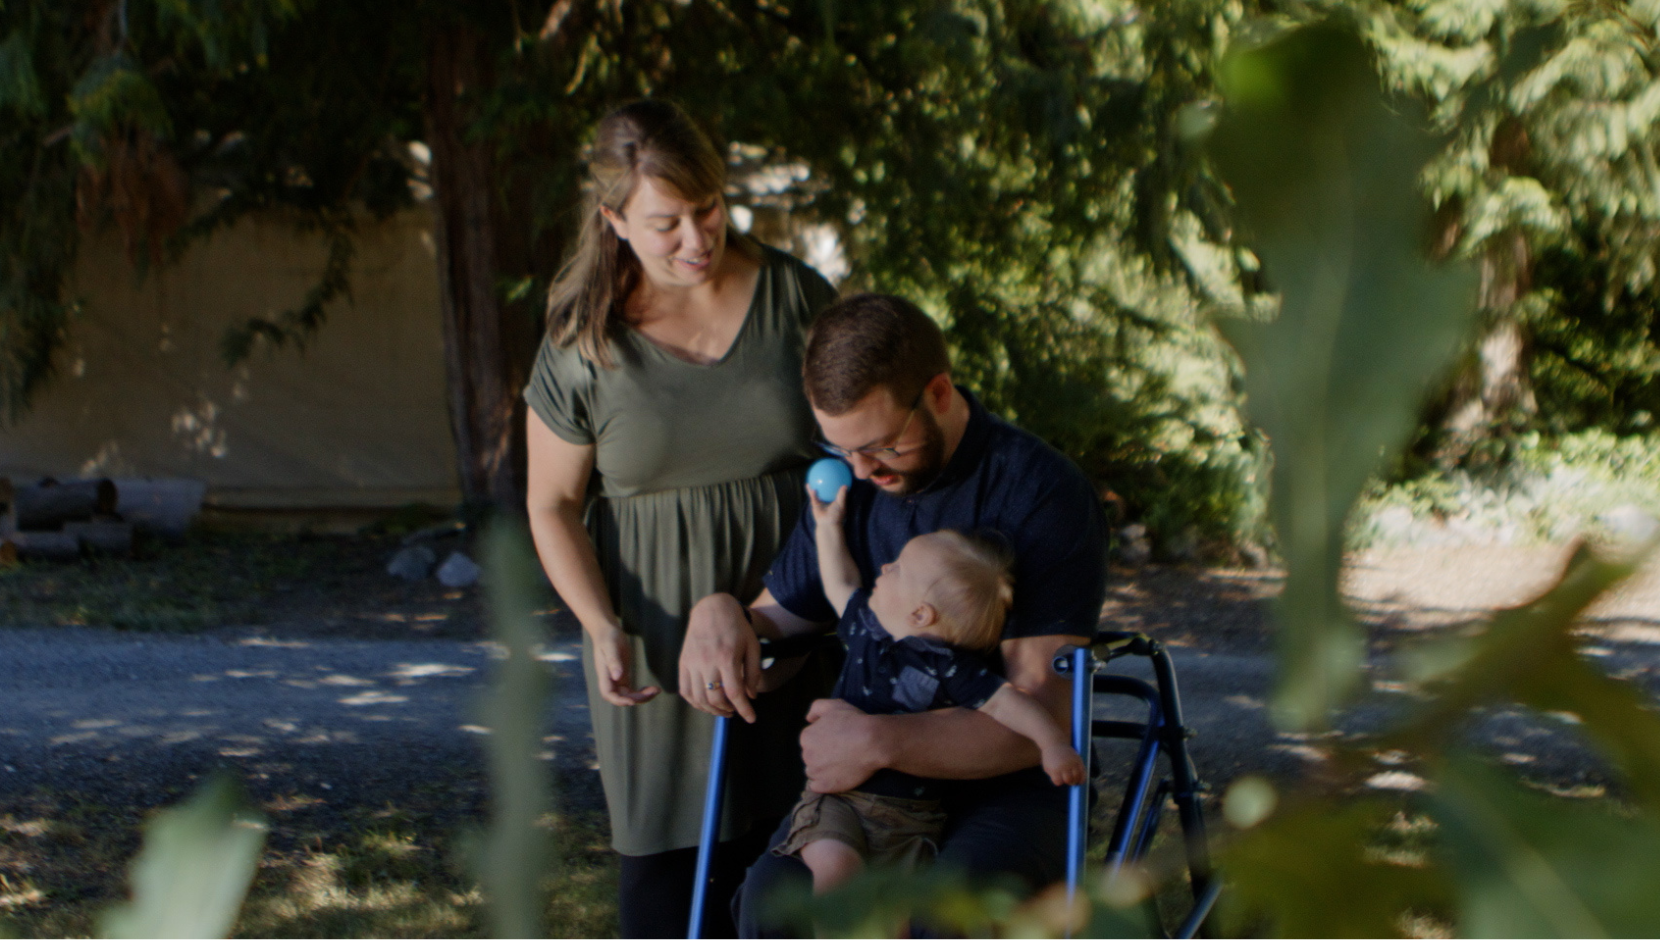 Adam Bishop with his family. The three people are gathered around his blue walker. His baby son is in his arms, reaching a ball up to his wife, standing above.